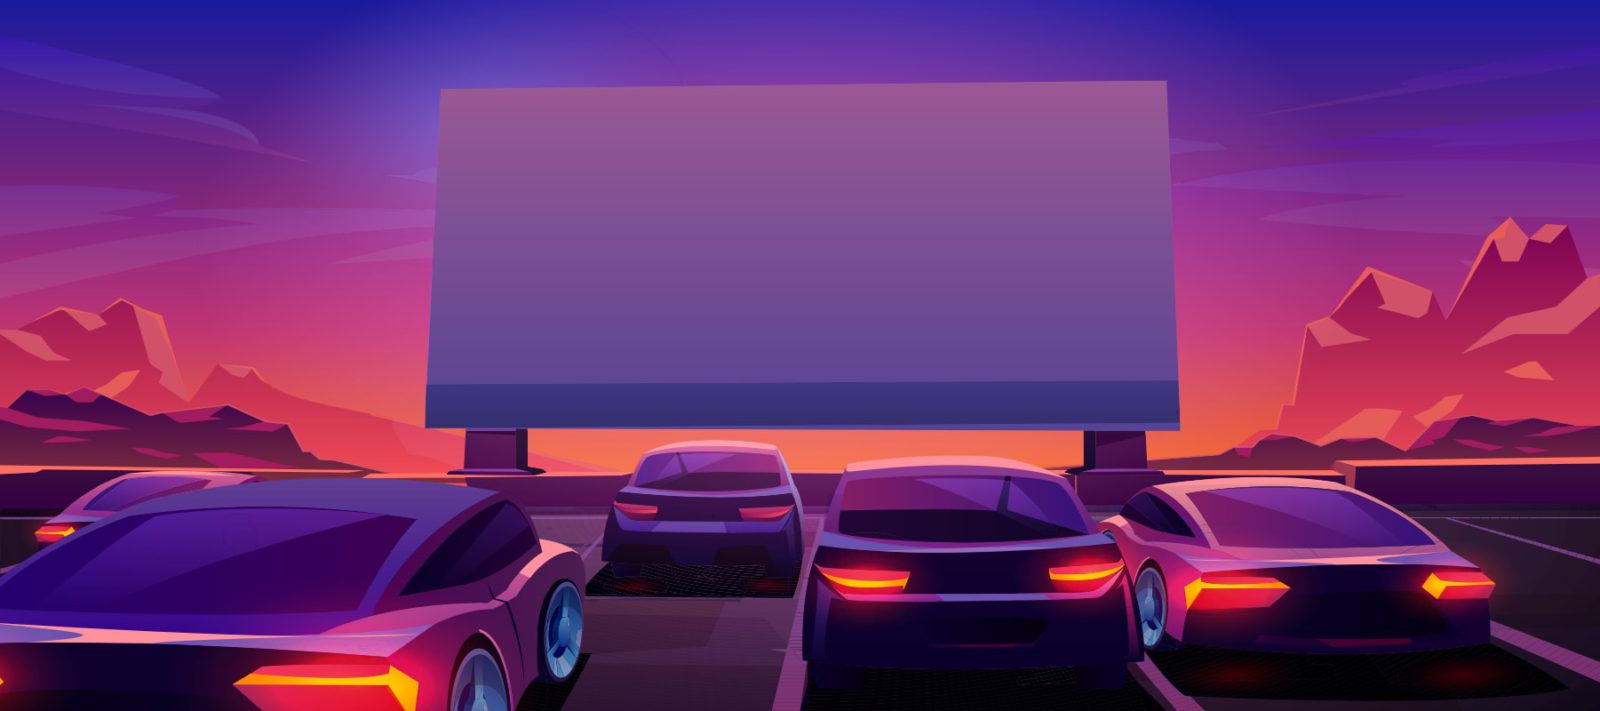 Illustration of Drive-In Theater - Sunset